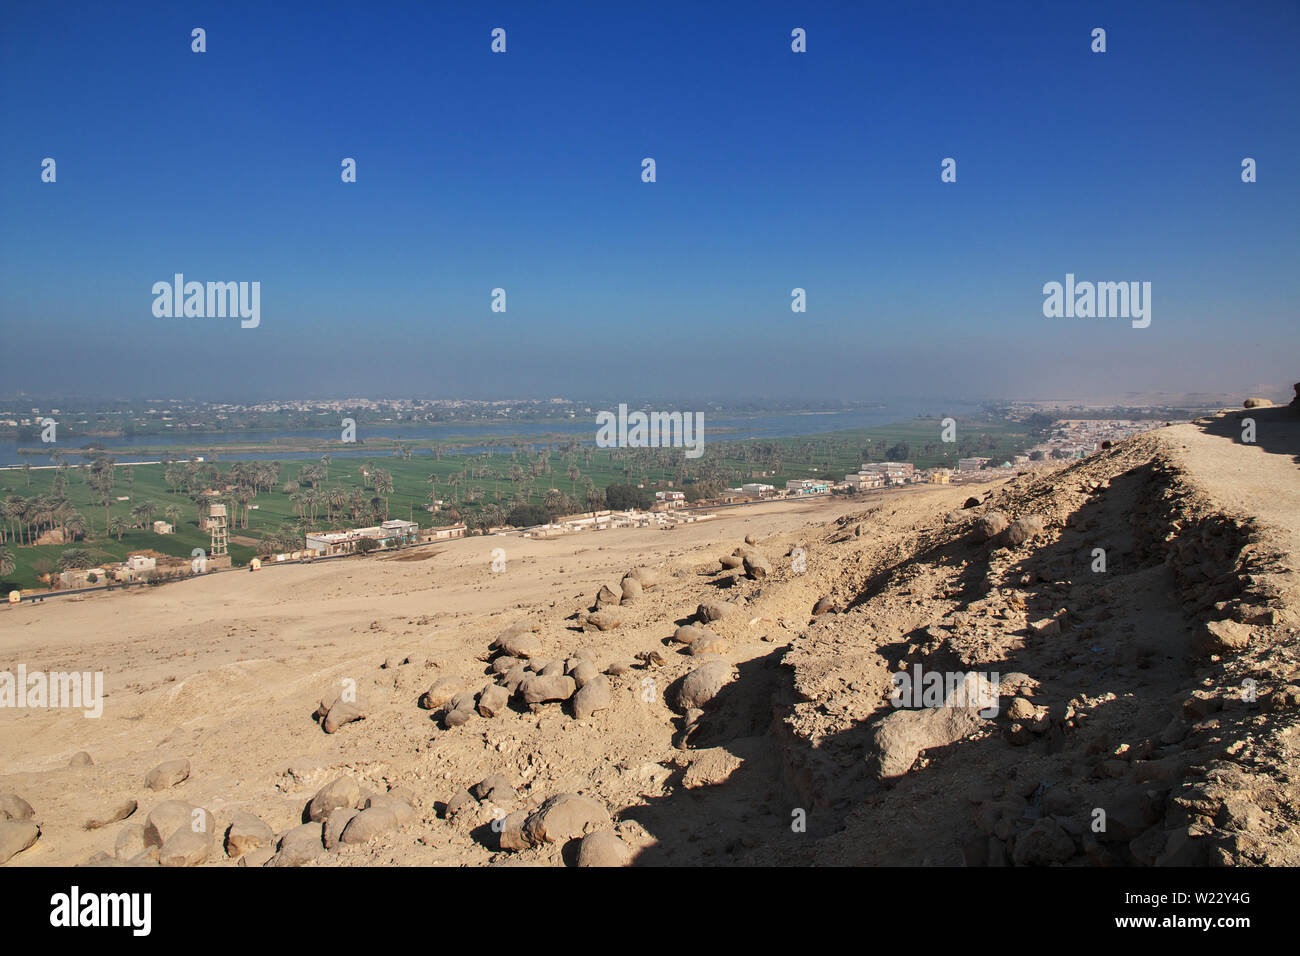 Tombs of the pharaohs in Amarna on the banks of the Nile, Egypt Stock Photo